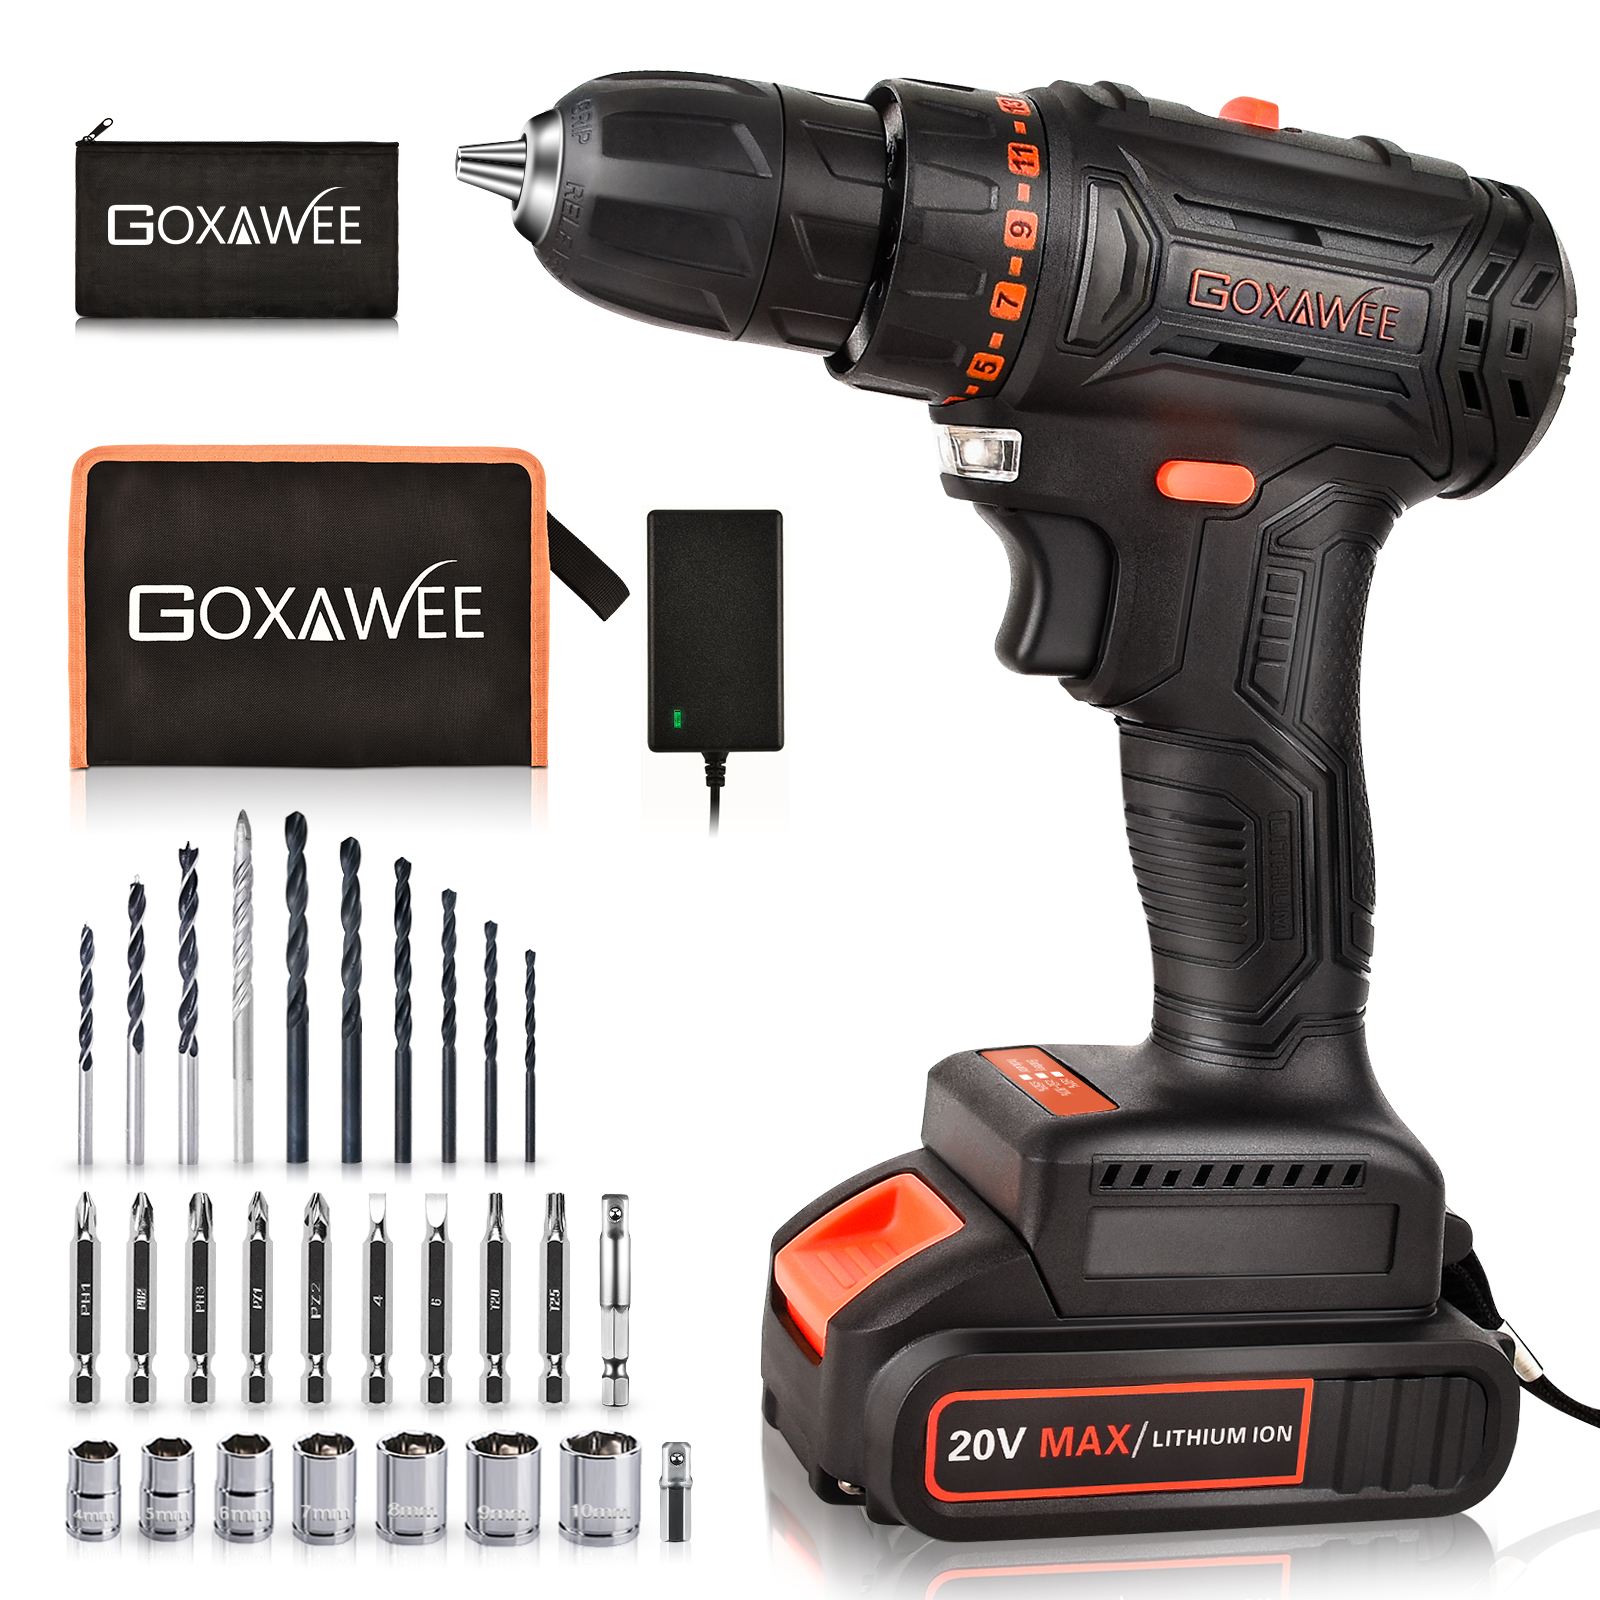 20V Brushless Cordless Drill Set, GOXAWEE Power Drill Kit with 2000 mAh Battery, 440 In-Lb Torque, 2 Speed, 23+1 Clutch, Home Tool Electric Screw Driver for Drilling and Fastening Applications